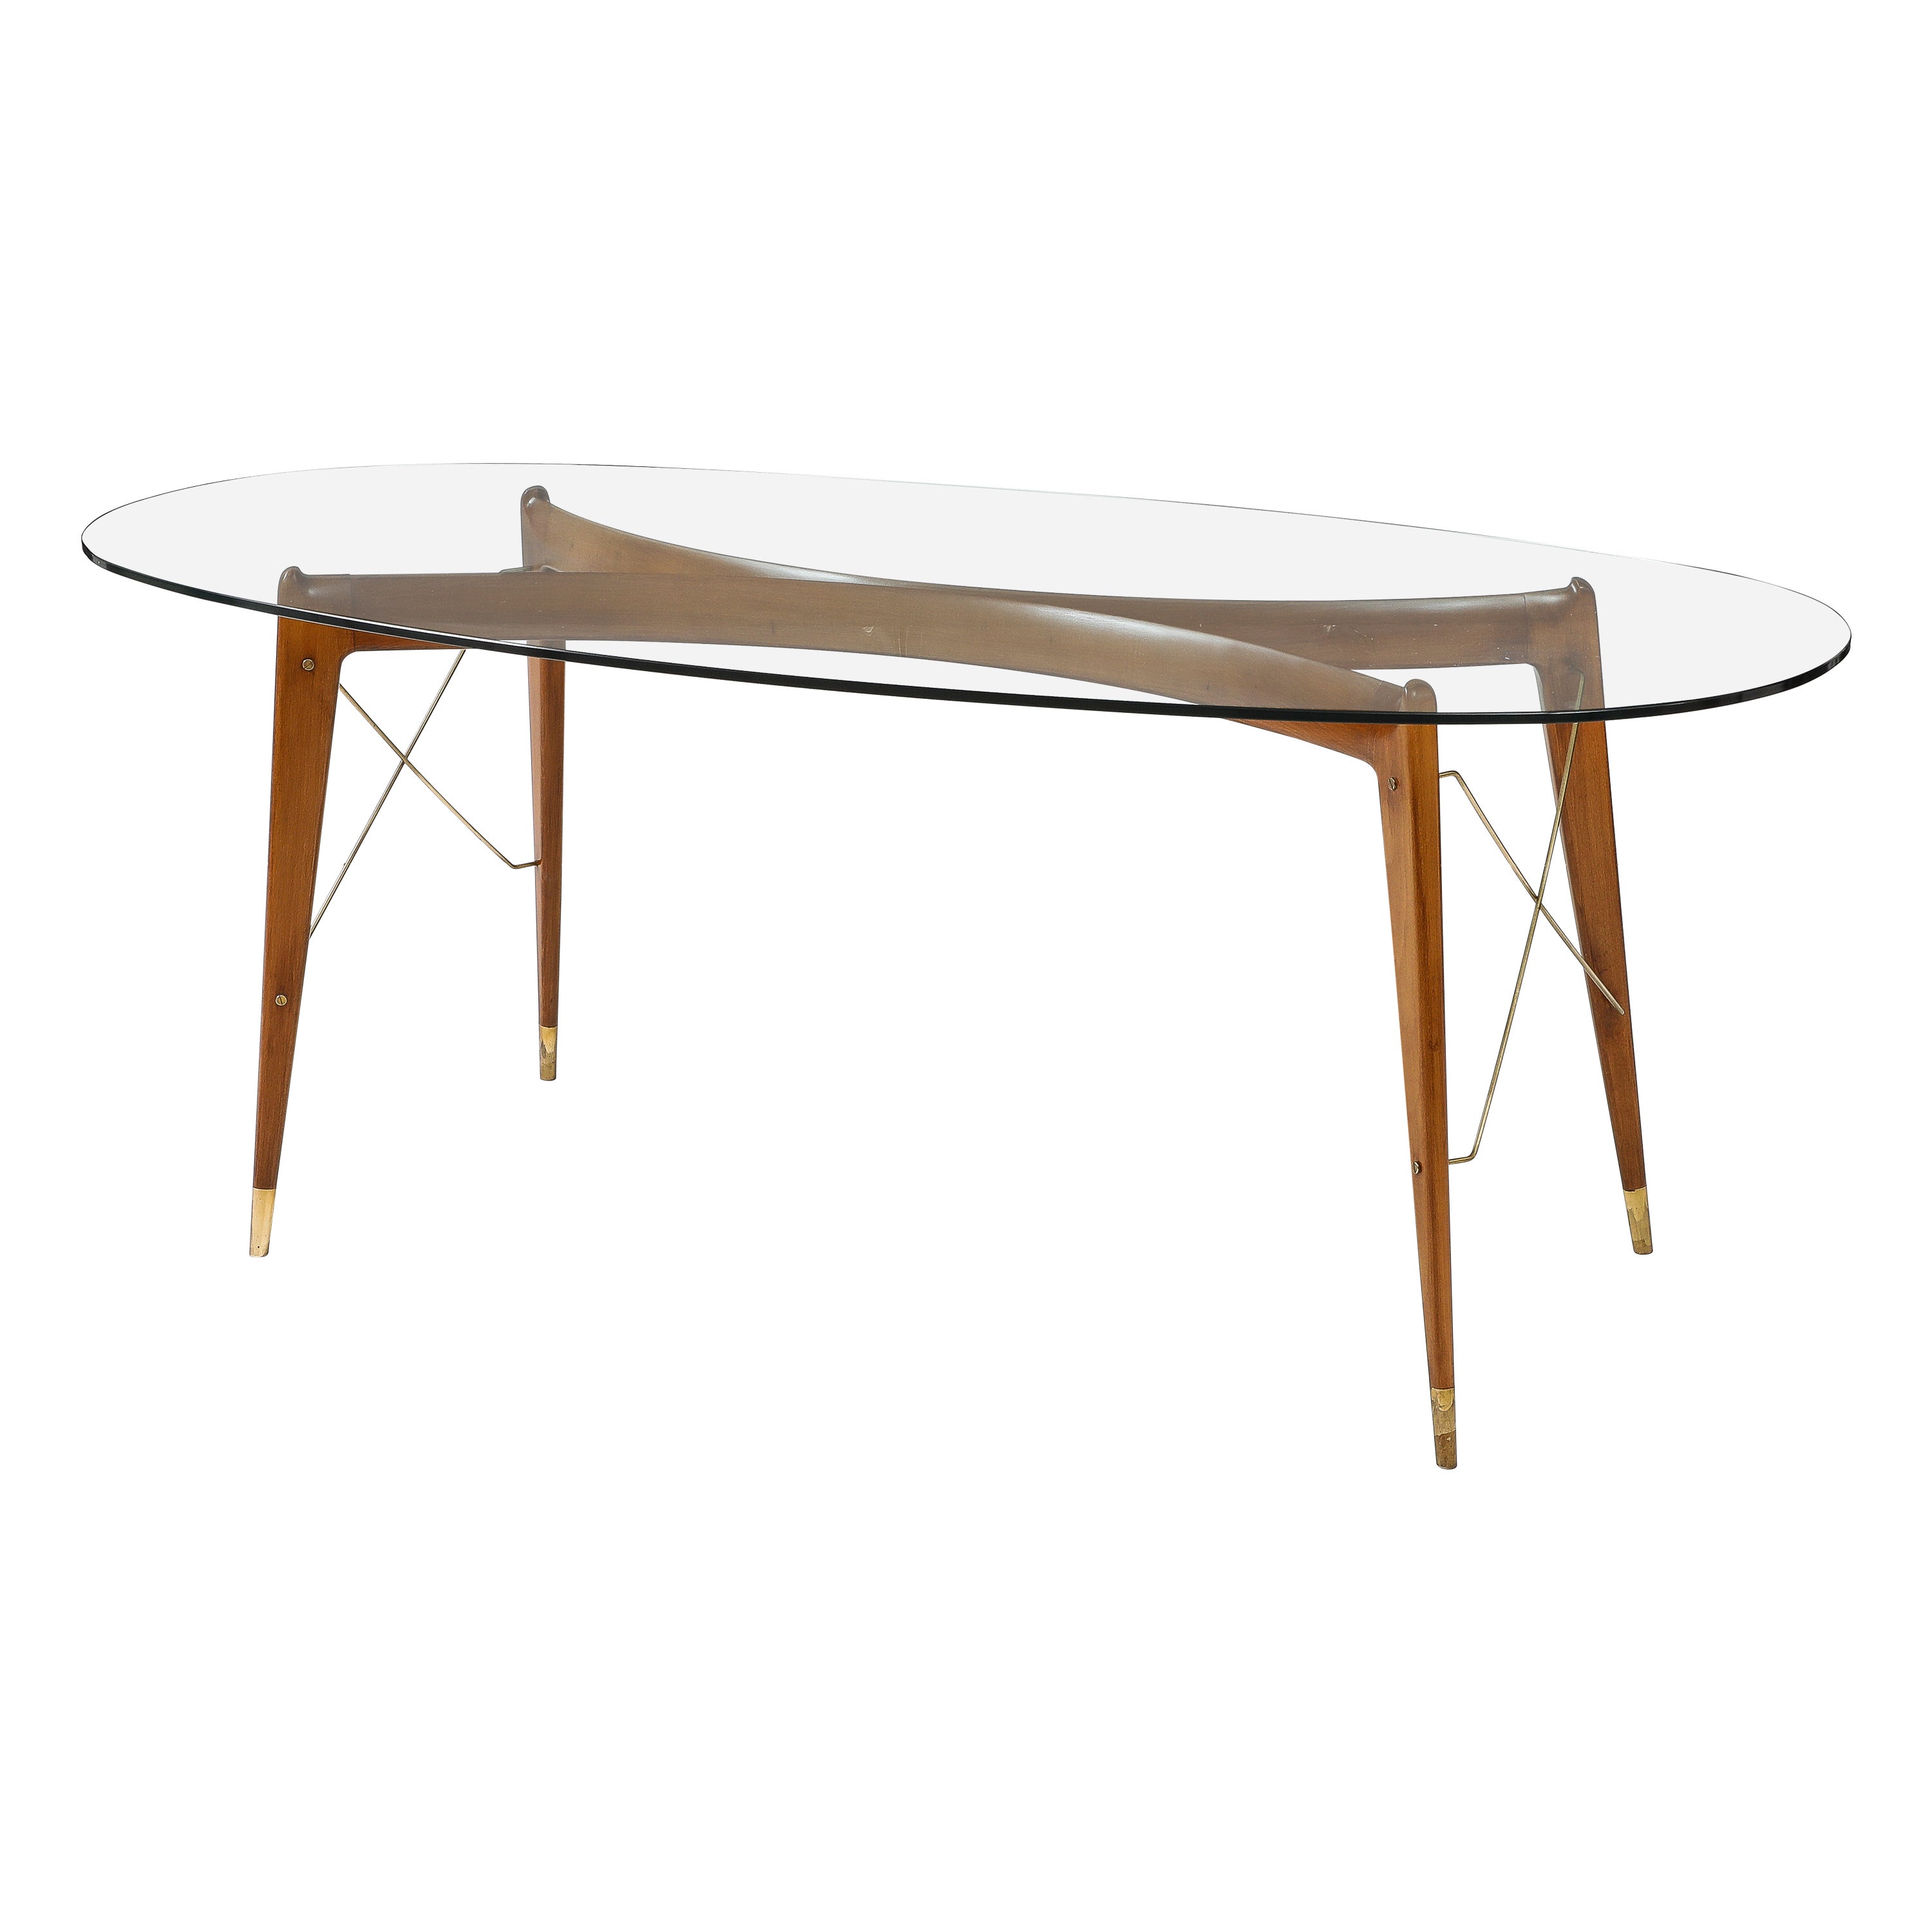 1950's Ico Parisi Attributed Sculptural Cherrywood And Brass Dining Table For Sale